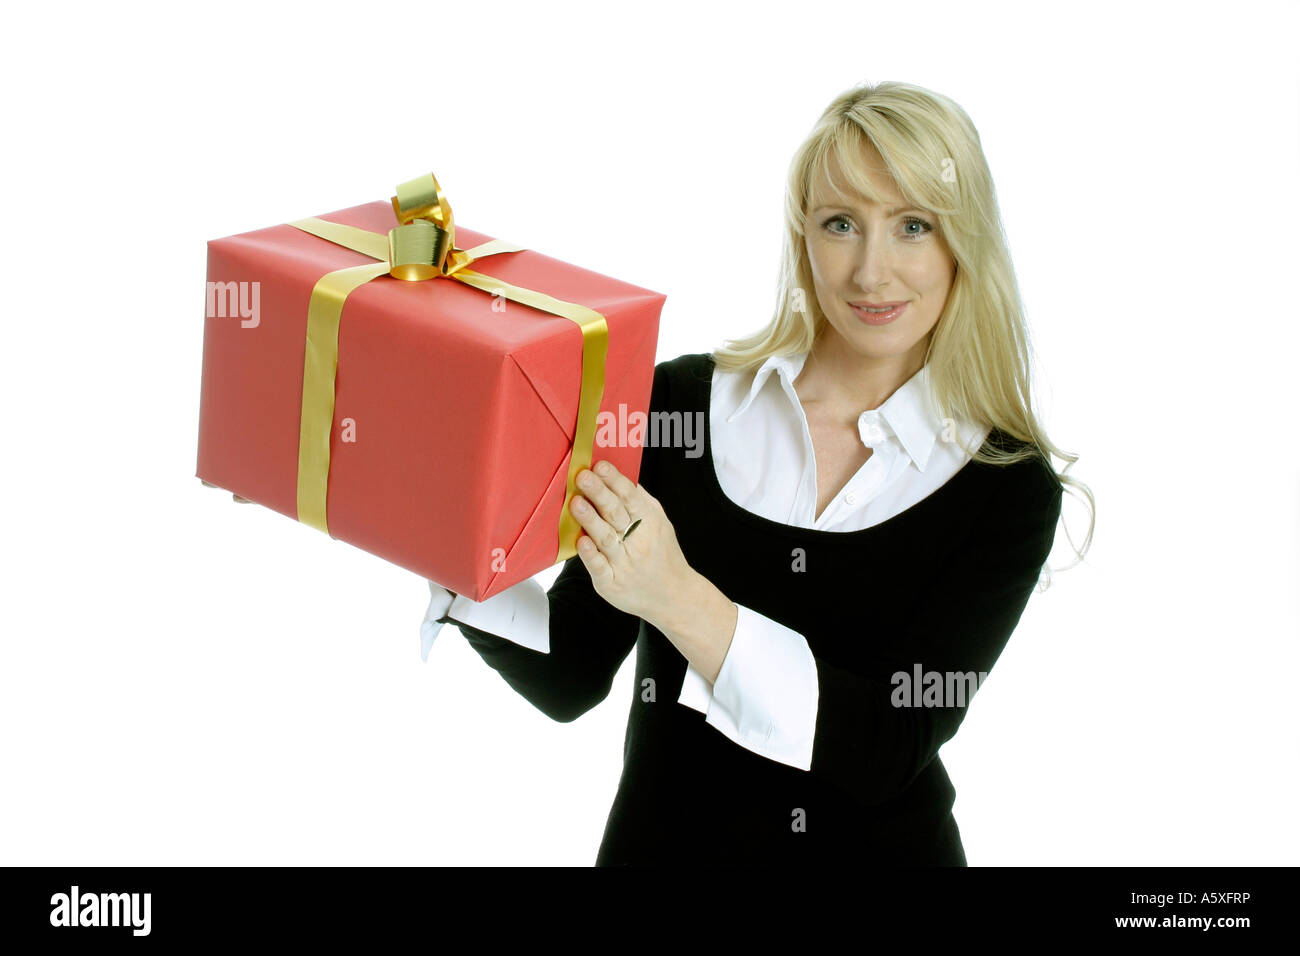 Mid adult woman holding Christmas Gift close up portrait Banque D'Images